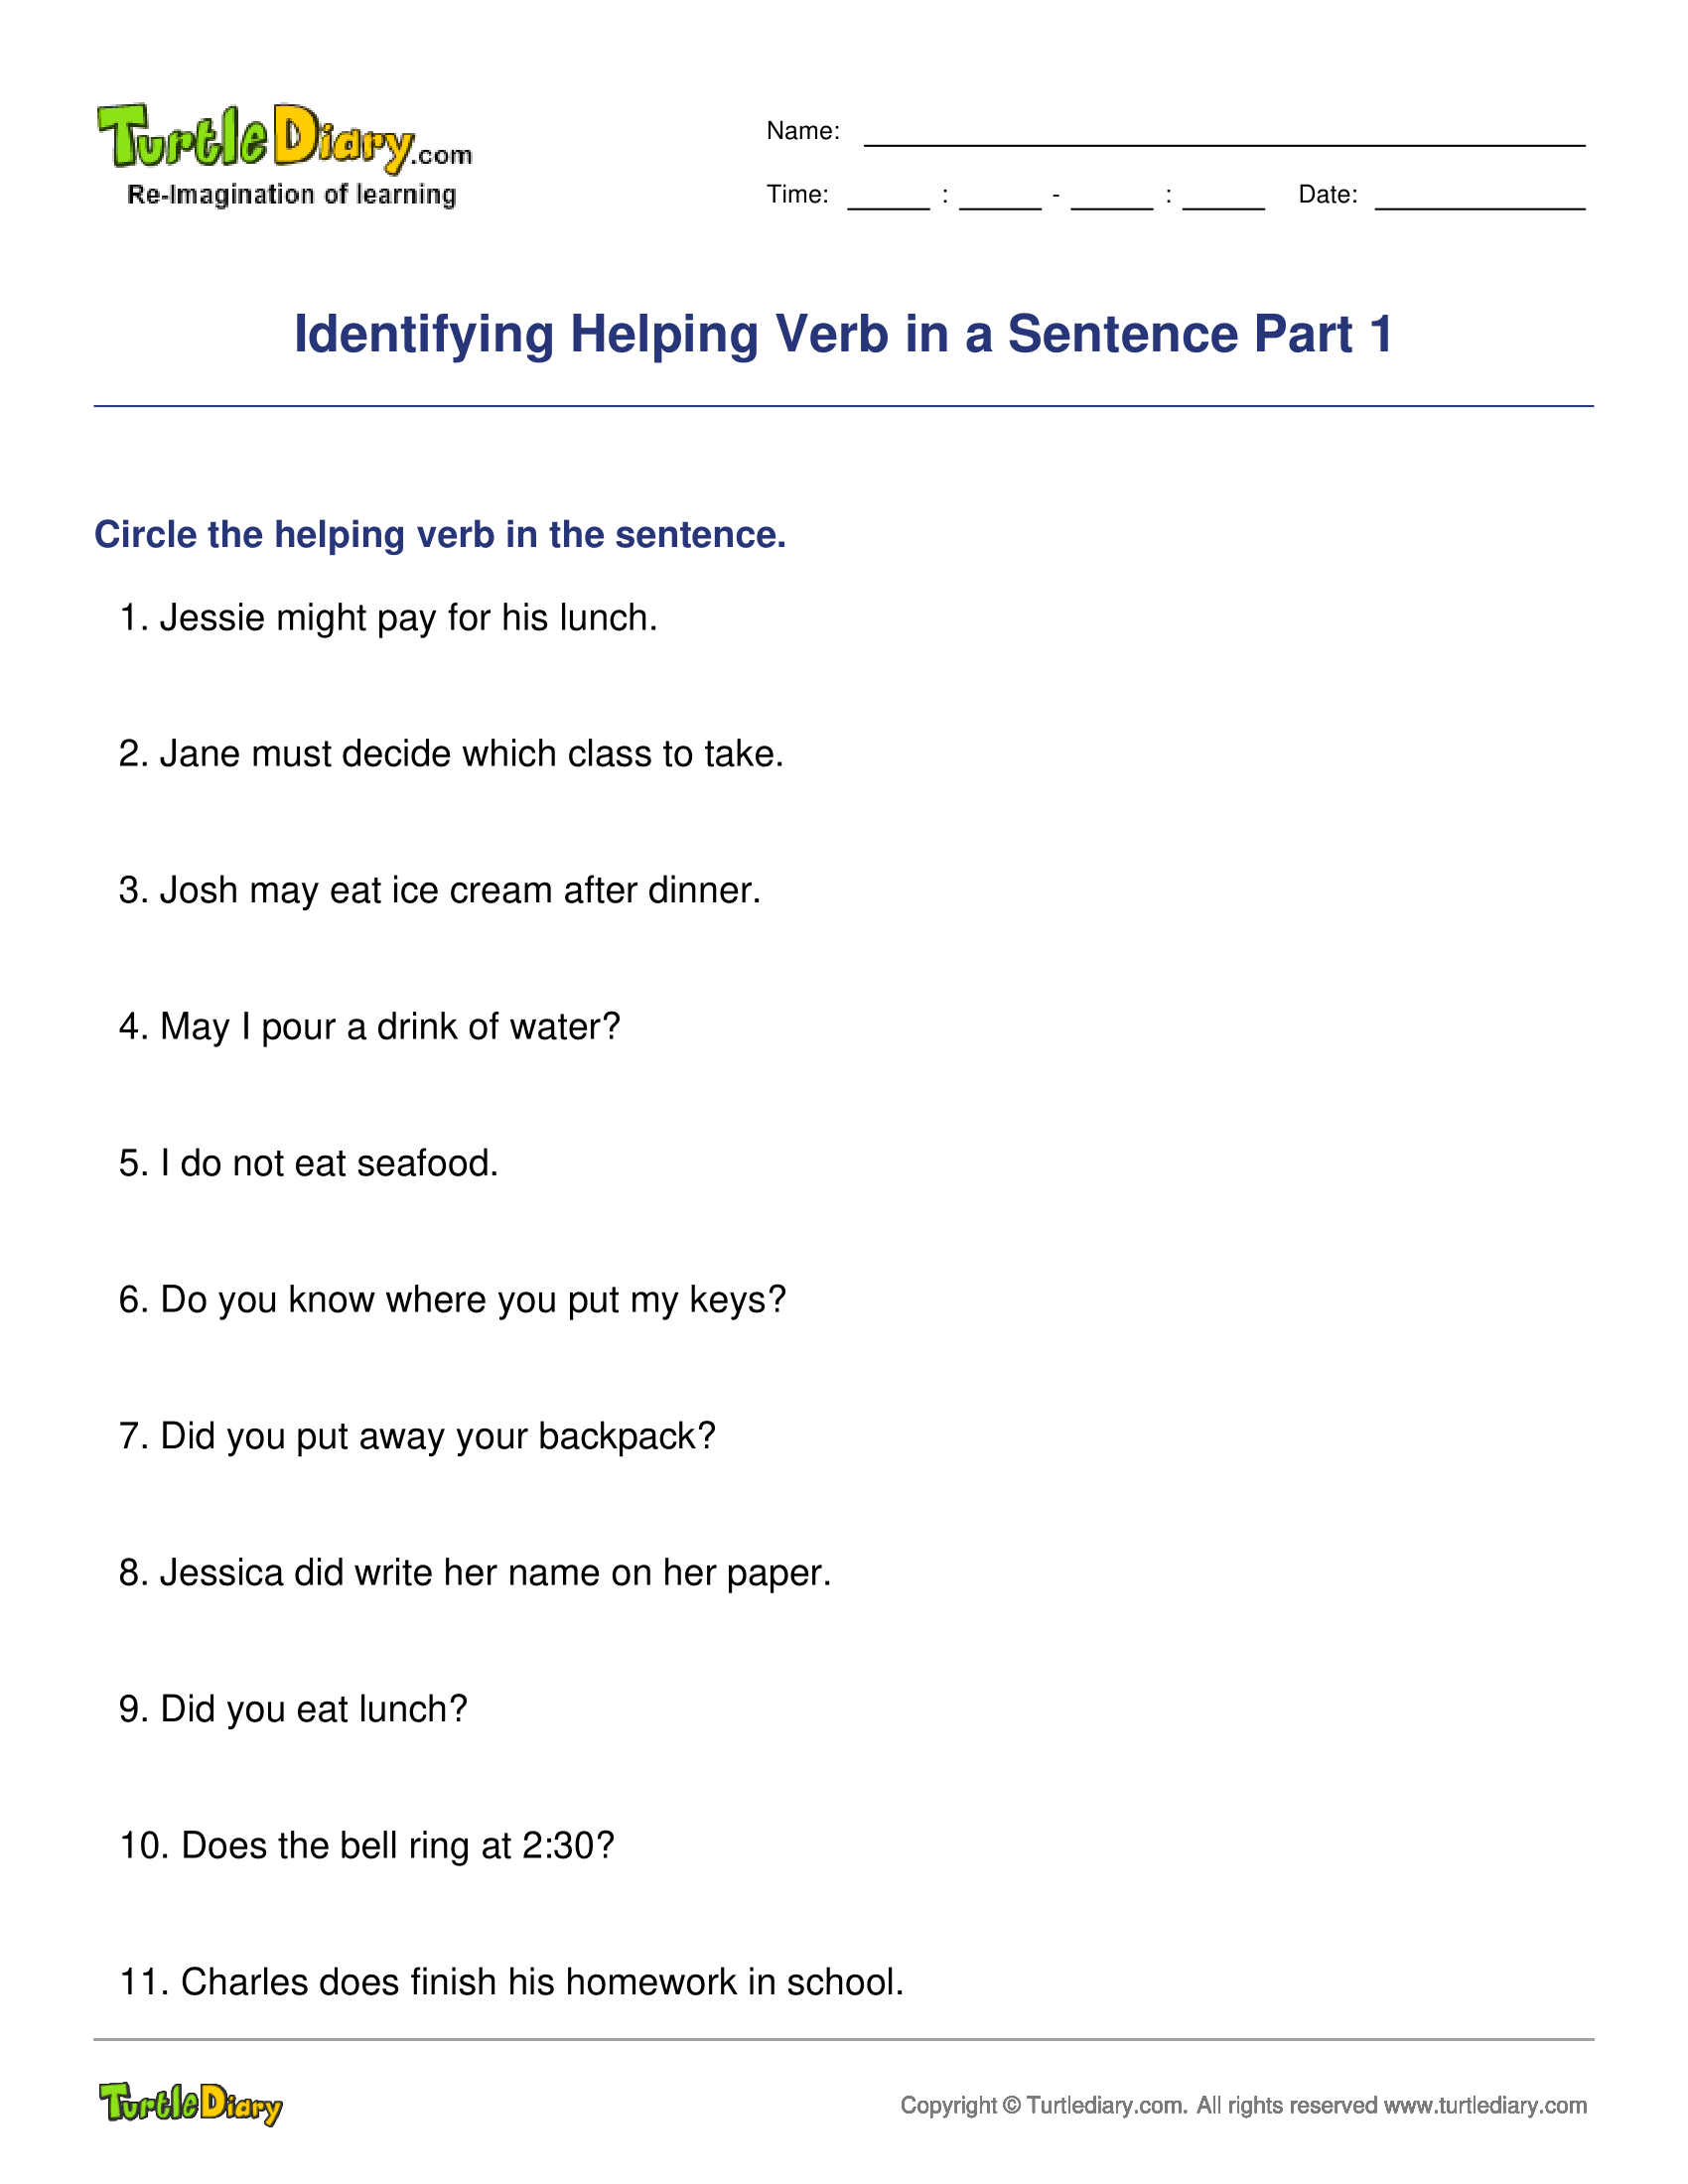 Identifying Helping Verb in a Sentence Part 1